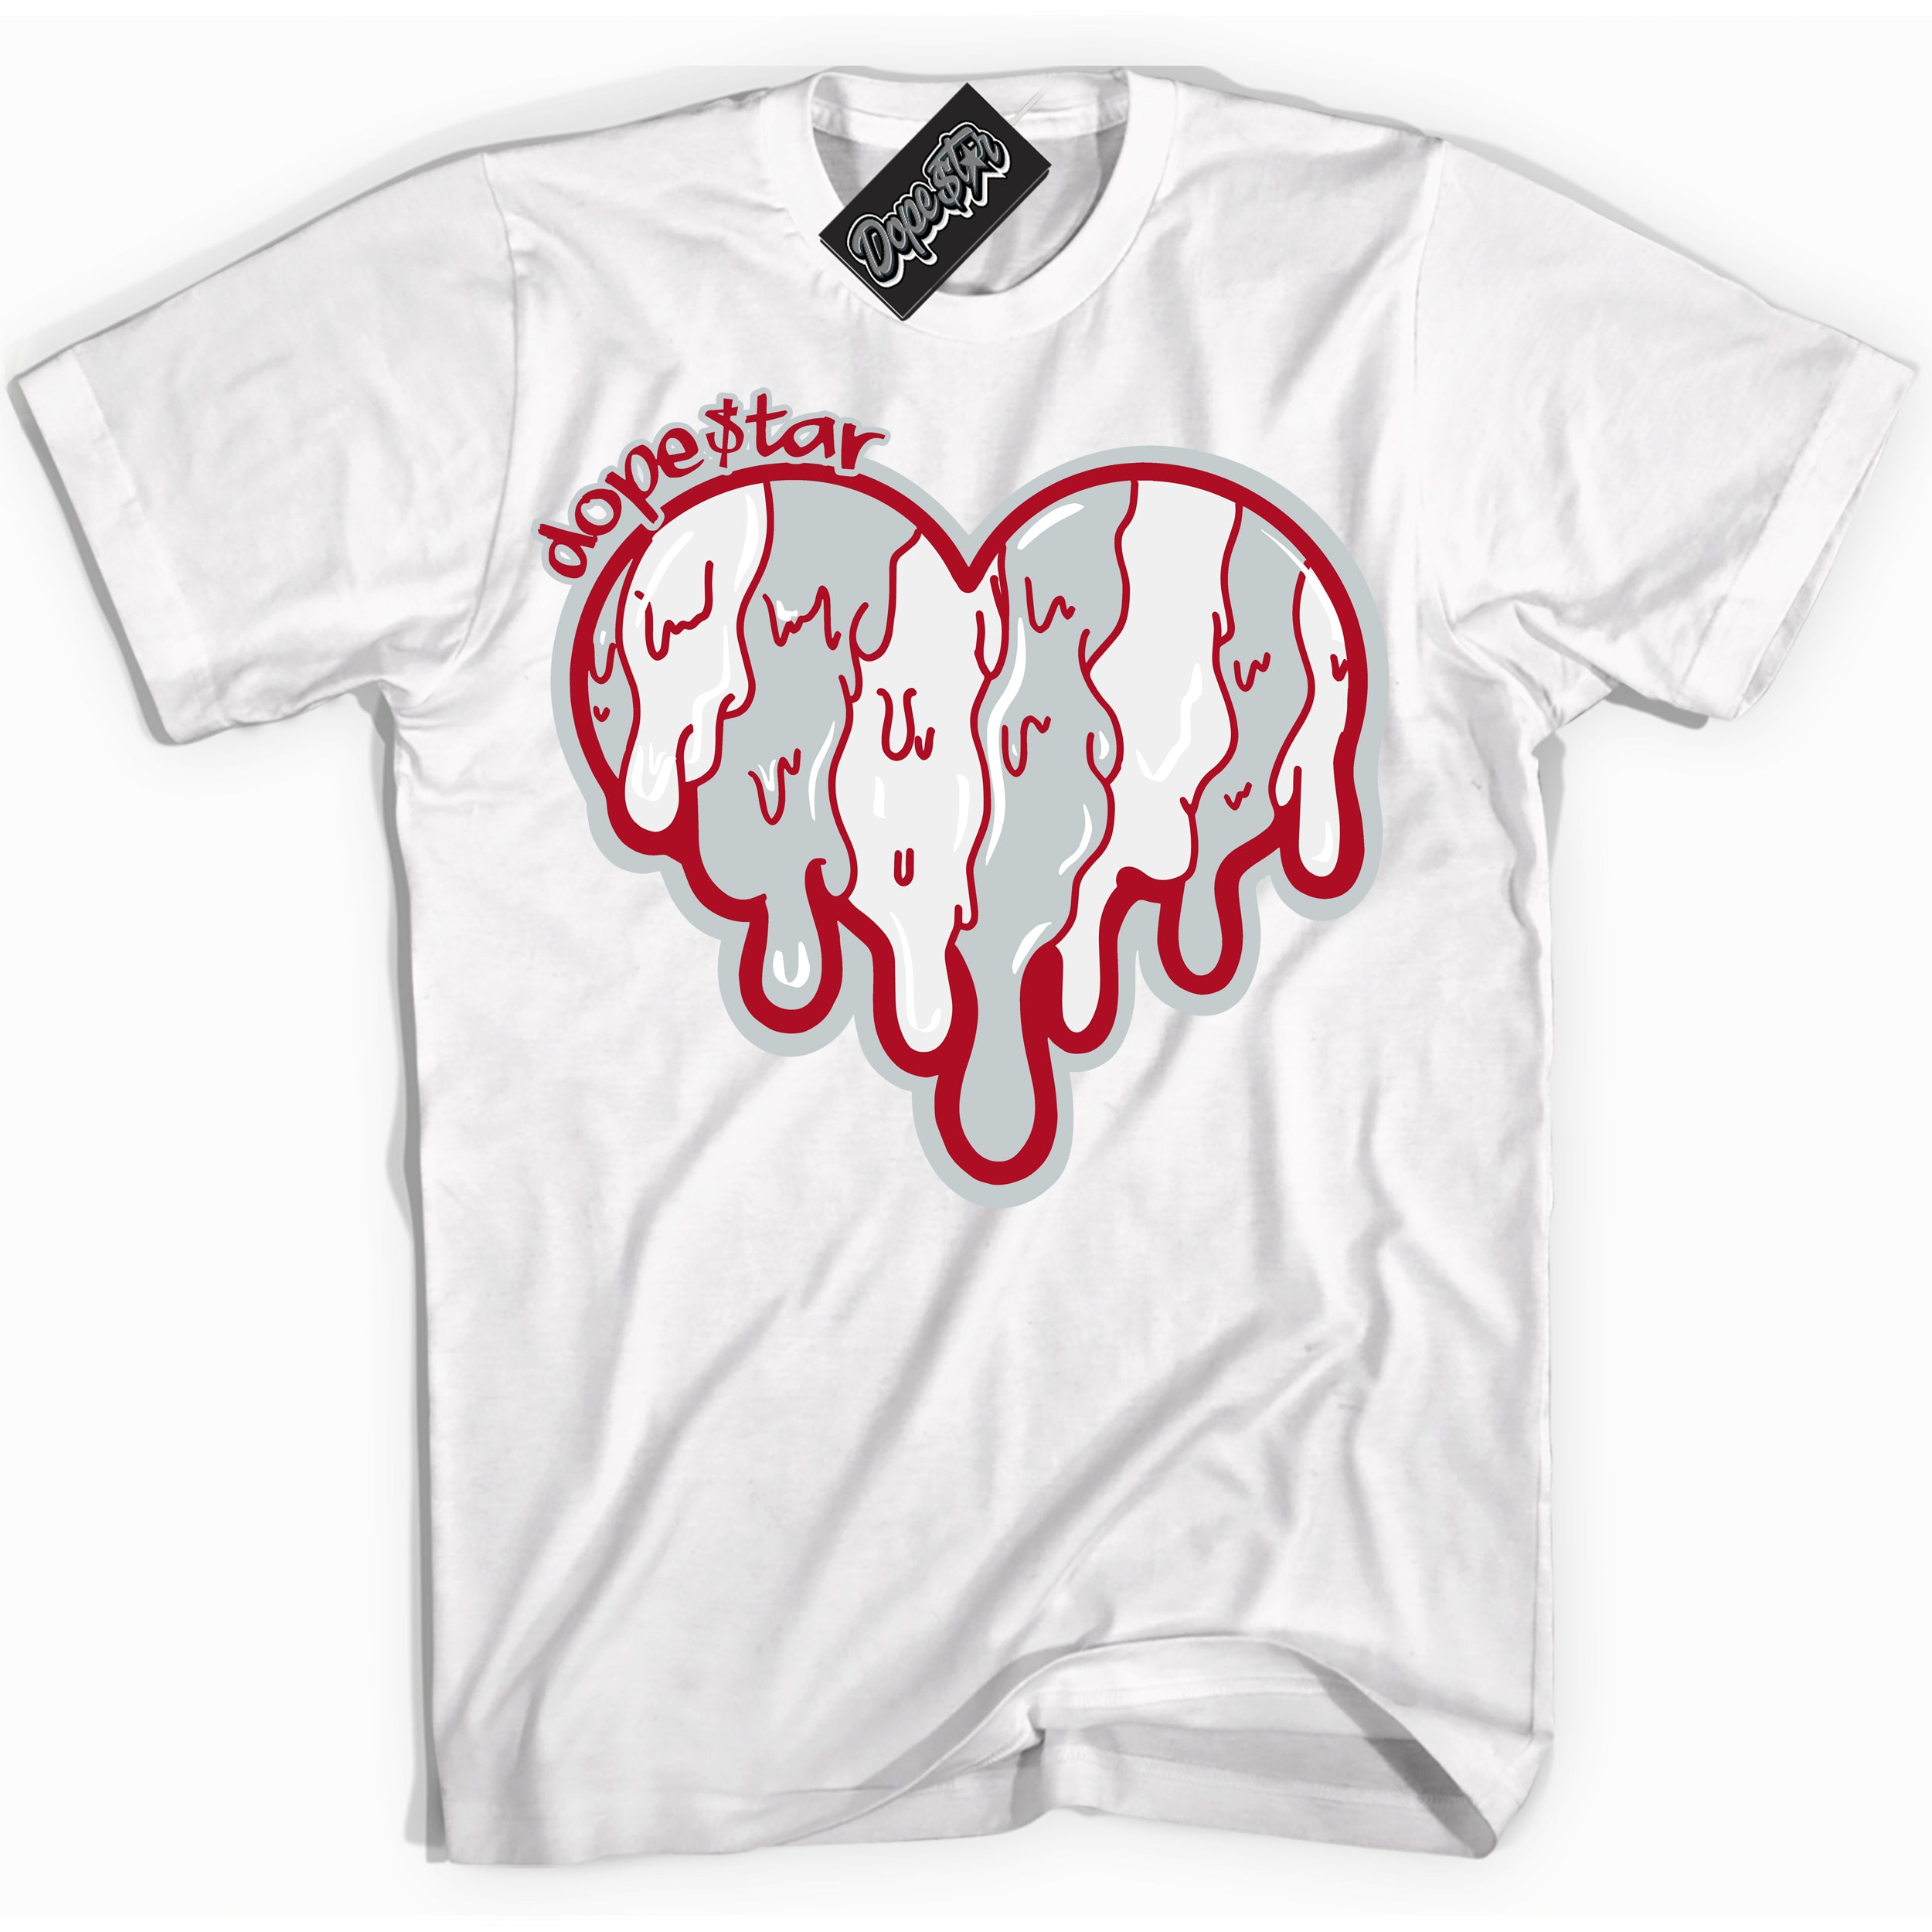 Cool White Shirt with “ Melting Heart” design that perfectly matches Reverse Ultraman Sneakers.